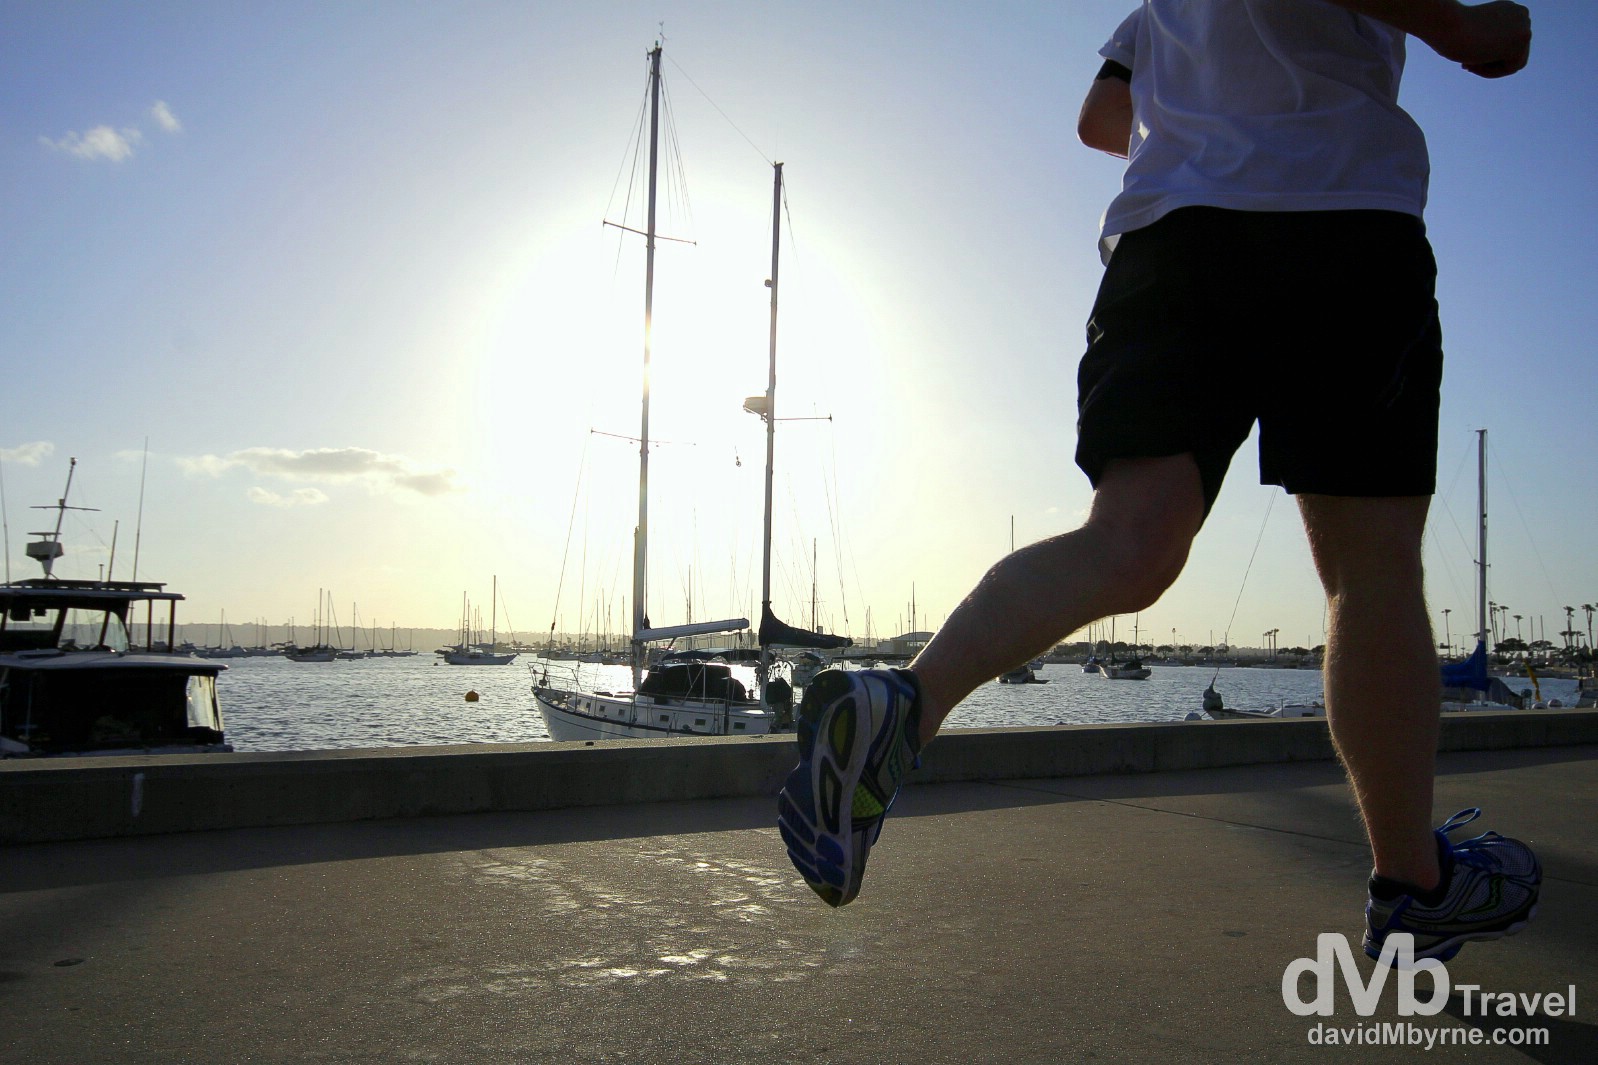 Running on Harbor Drive in San Diego, California, USA. April 16th 2013.